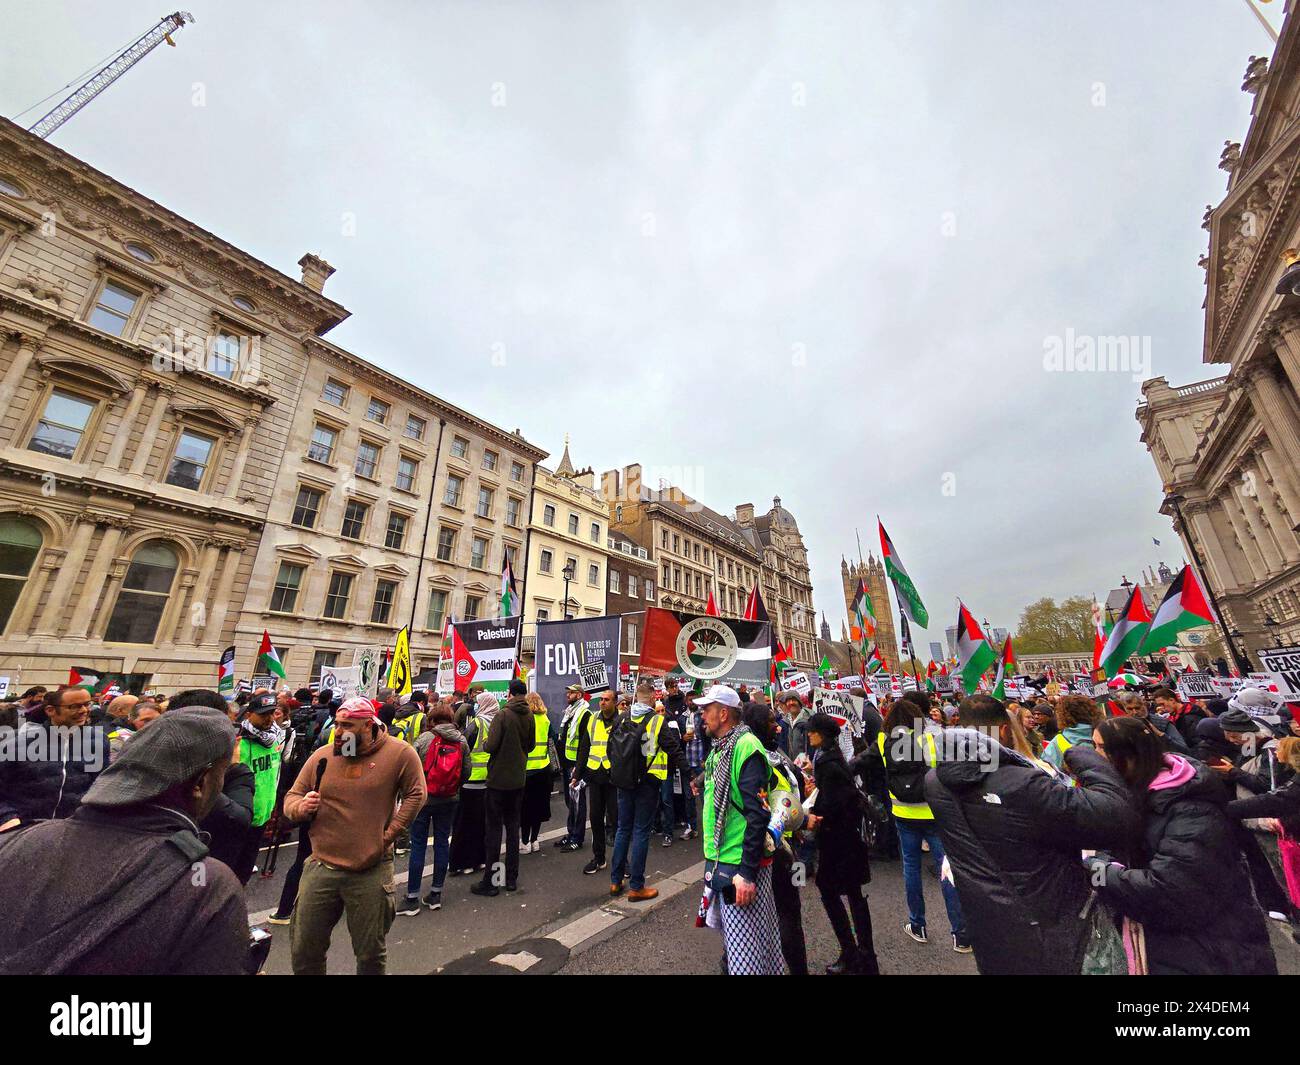 Thousands of Pro-Palestinians gathered for the Palestine Solidarity Campaign (PSC) demonstration in the capital to call for an immediate ceasefire in Gaza. London, United Kingdom. Stock Photo